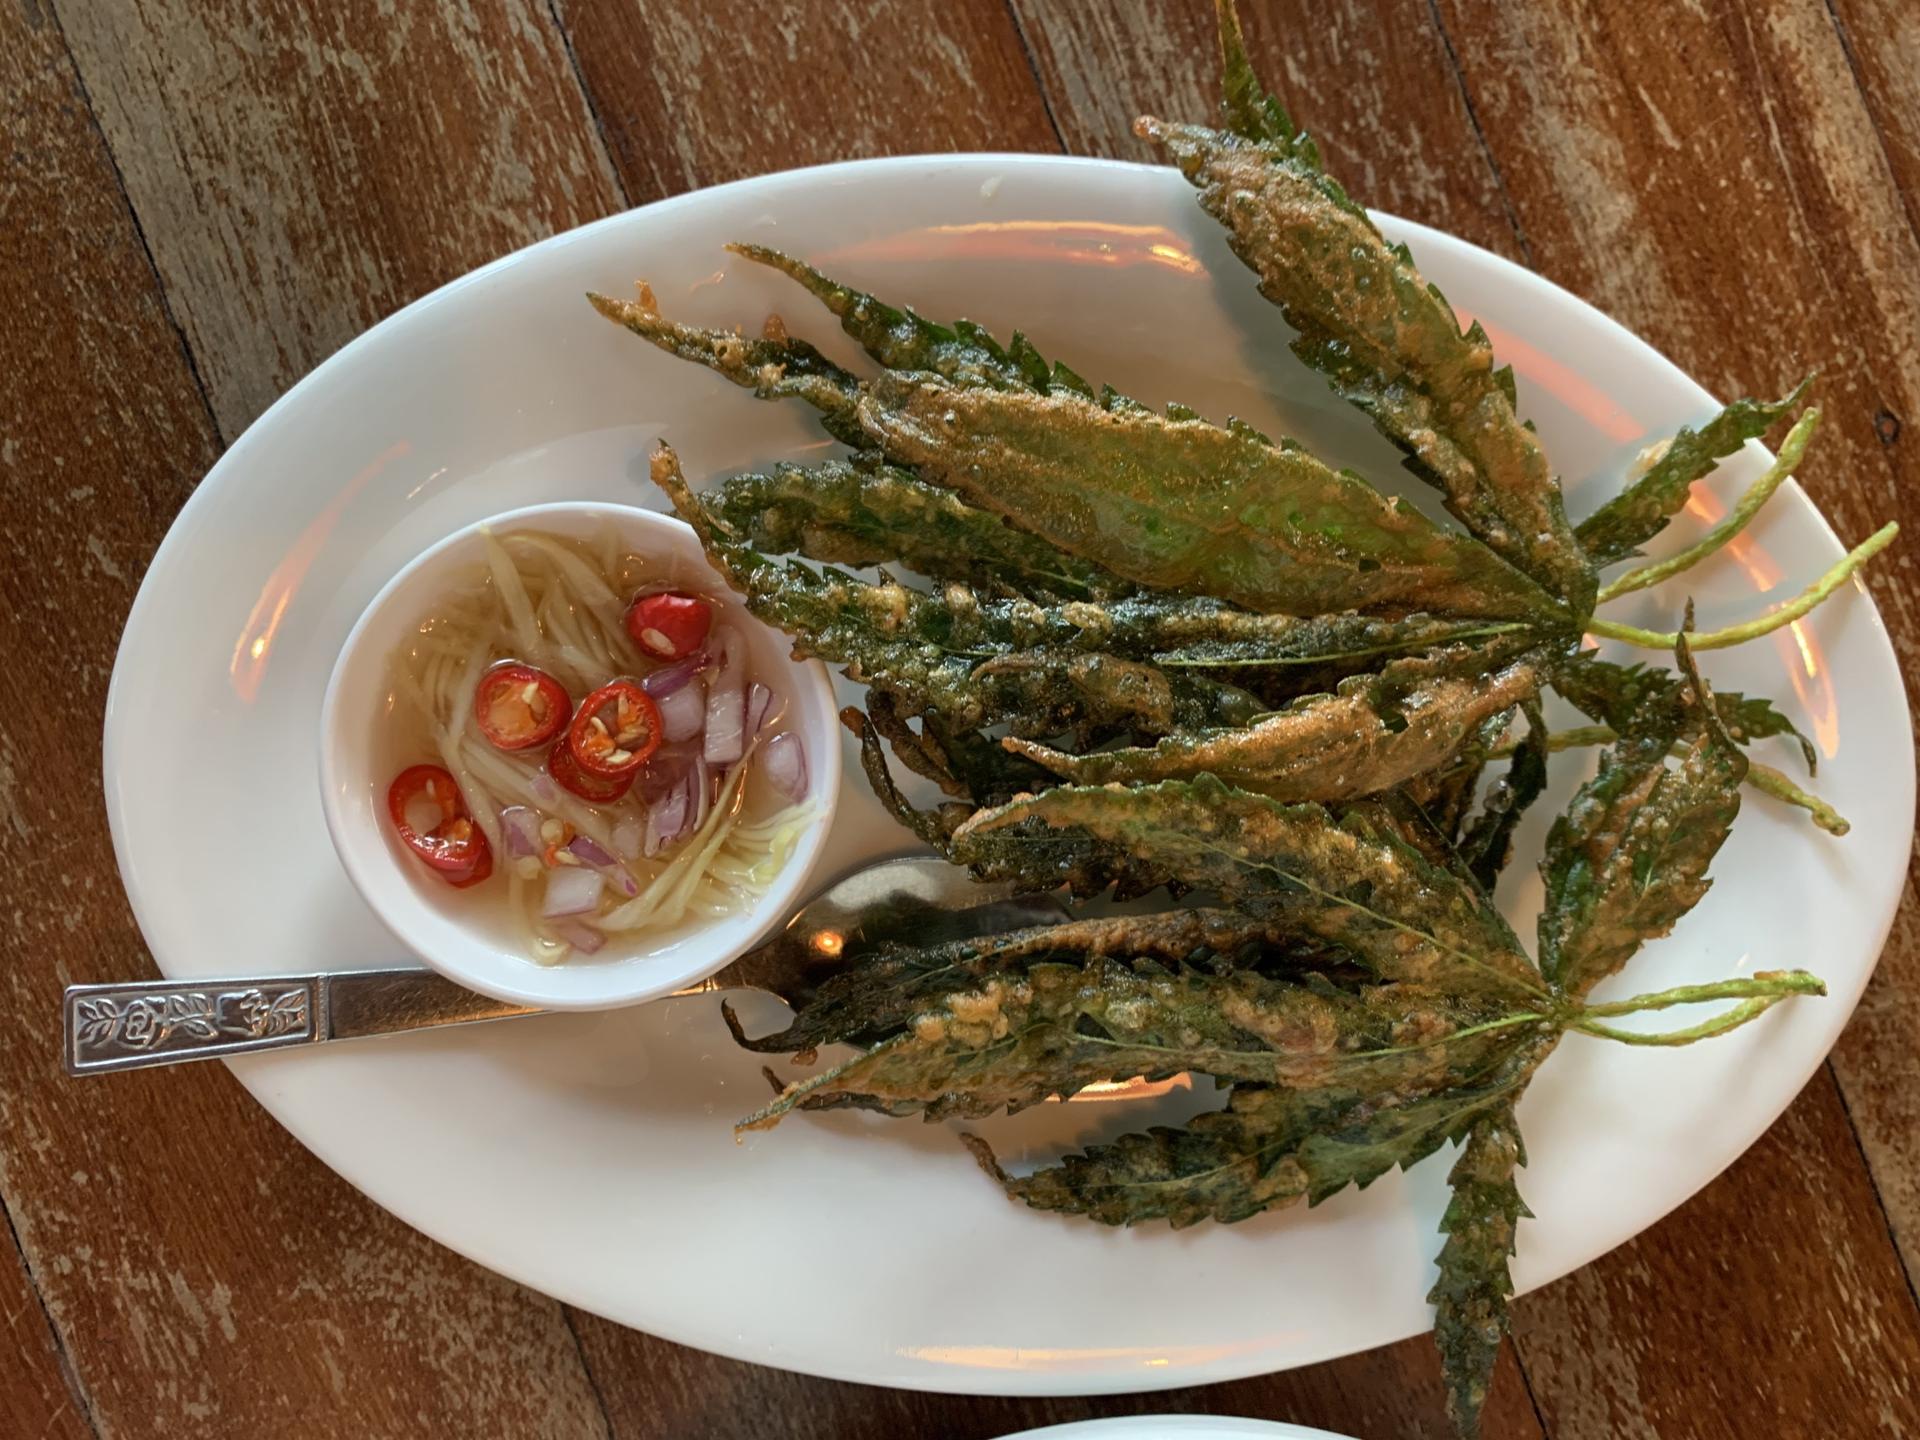 Cannabis leaves are incorporated into dishes at a restaurant called Baan Lao Ruang (The Storytelling House) in a rural area outside of Bangkok. 